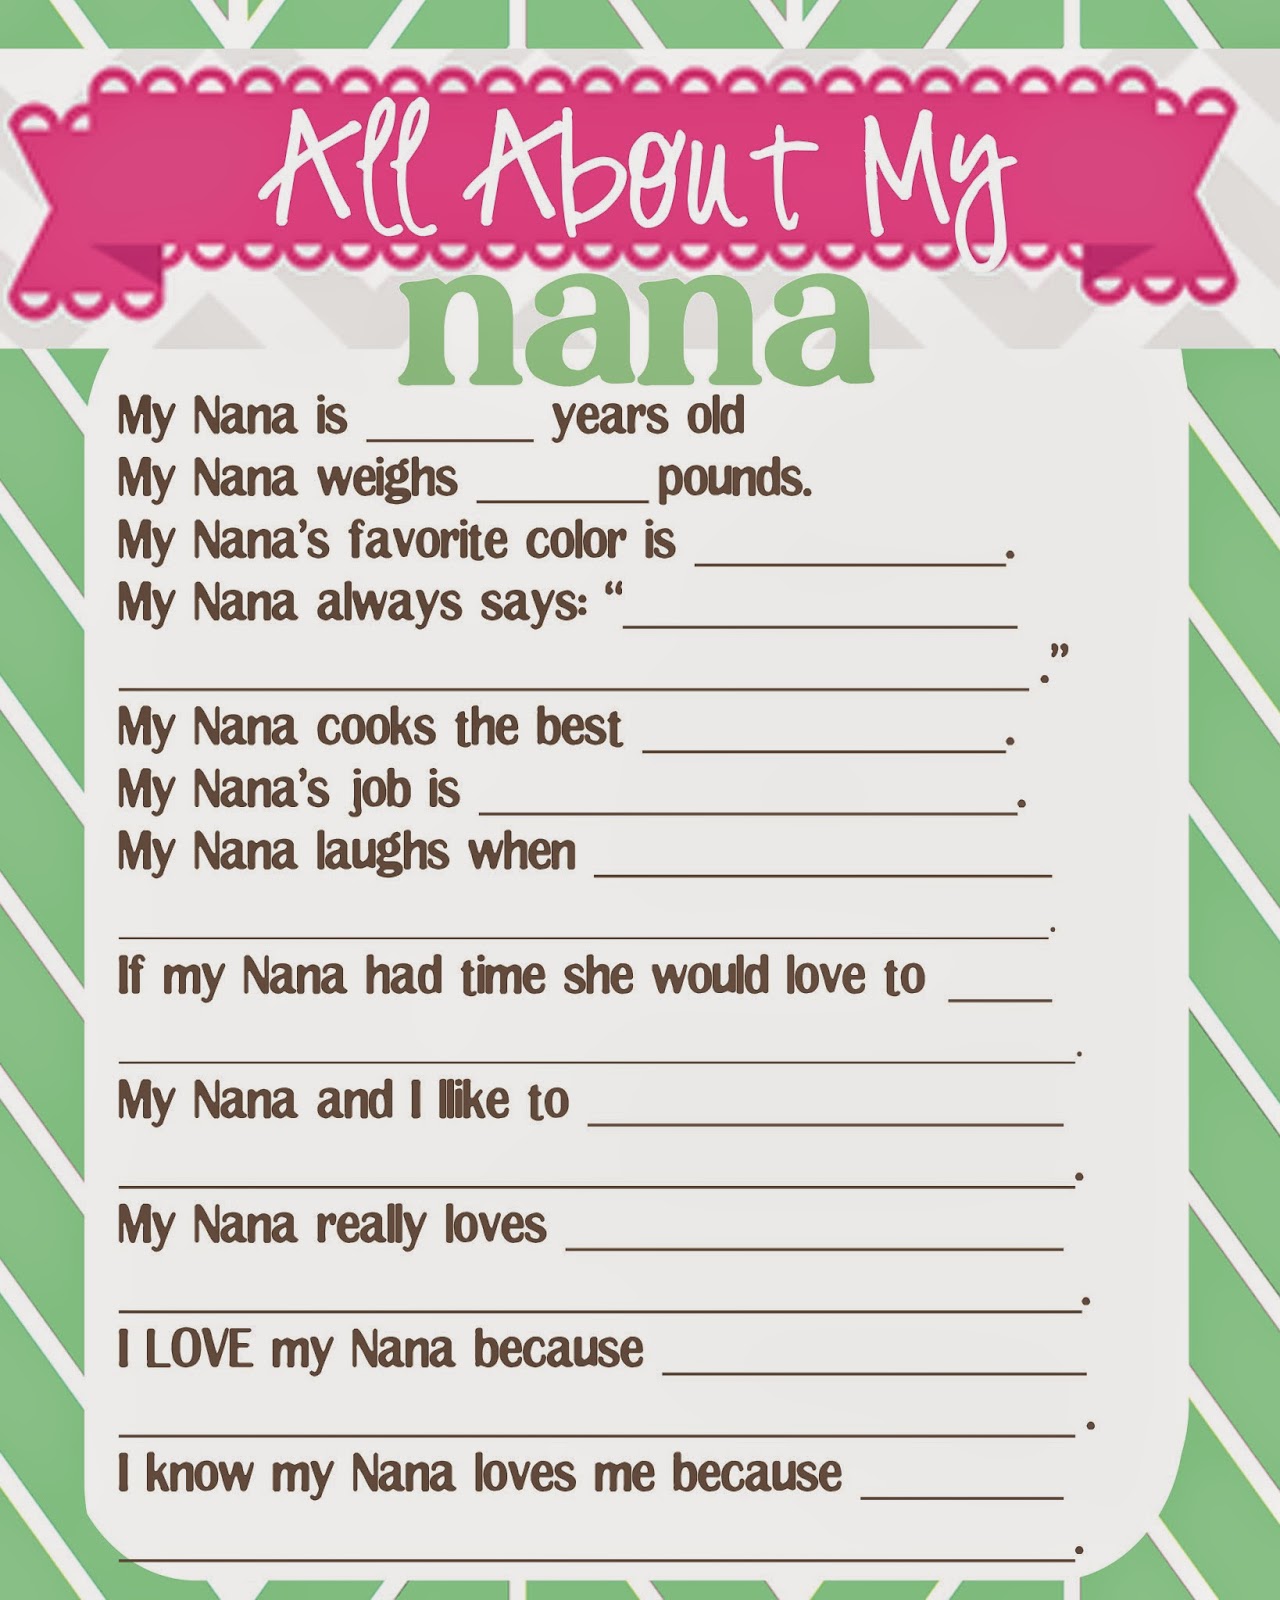 What Does The Cox Say?: Mother's Day Questionnaire and Free Printables